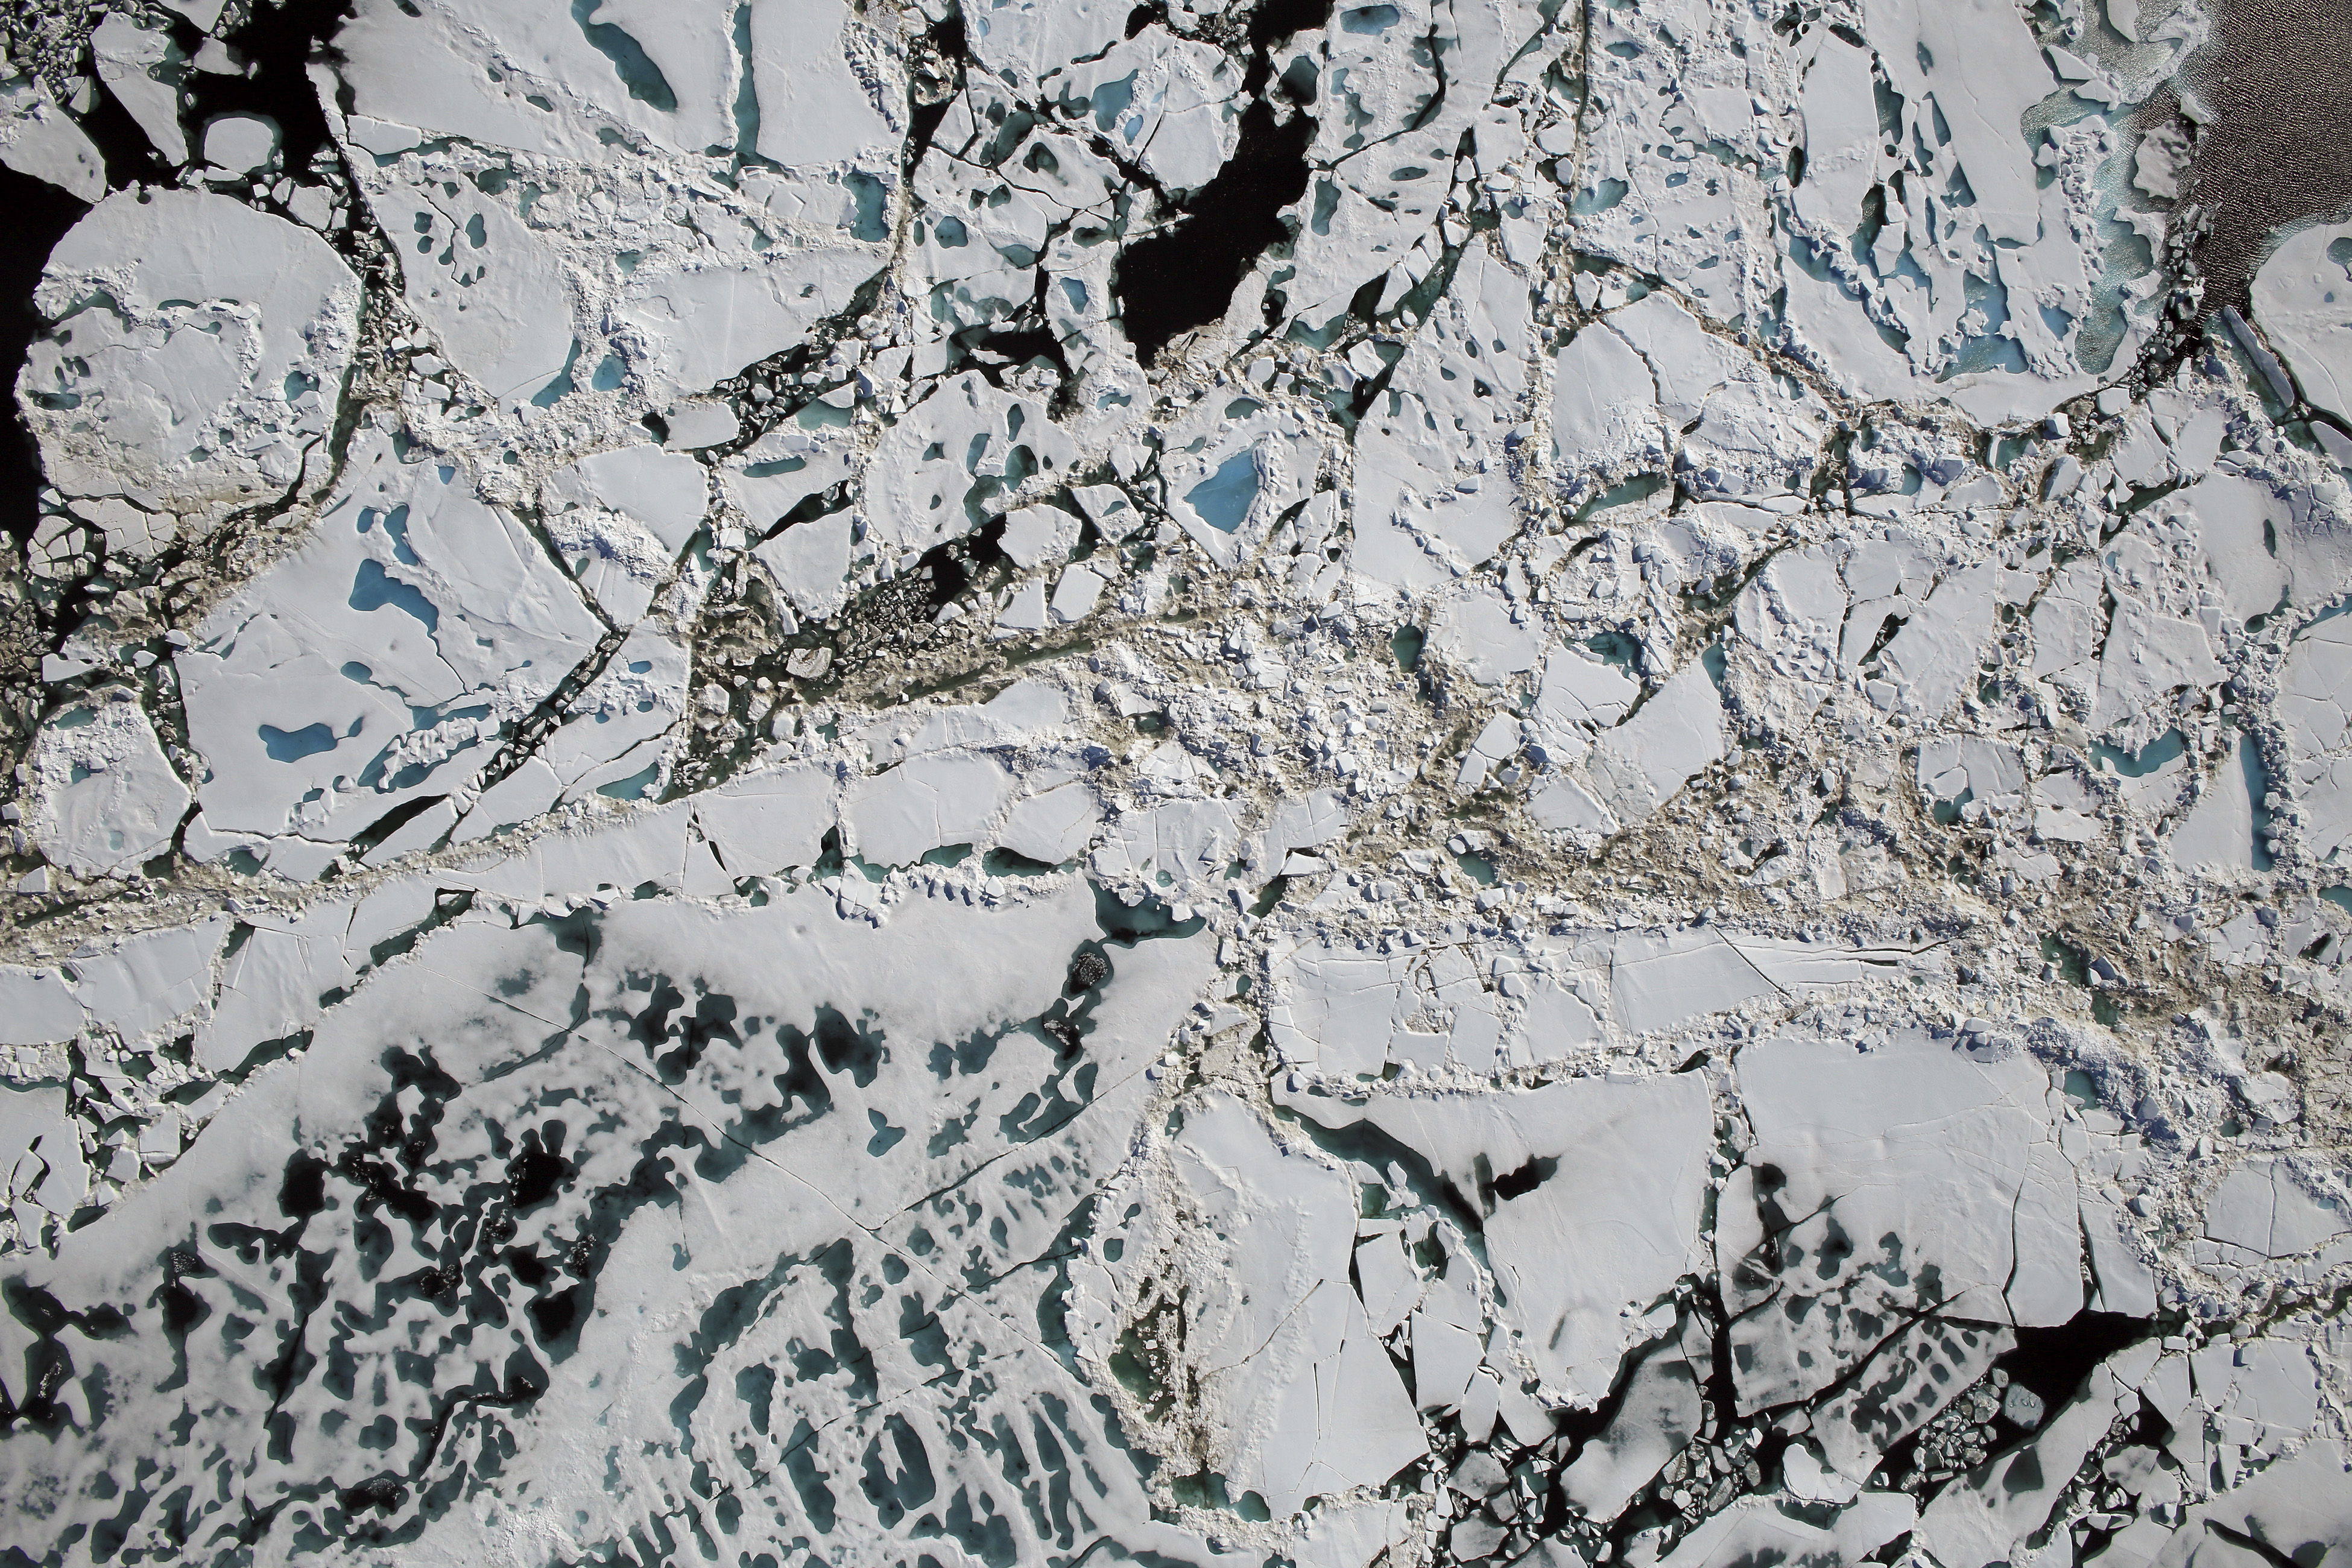 Speedier sea ice in warming Arctic could spread pollution farther